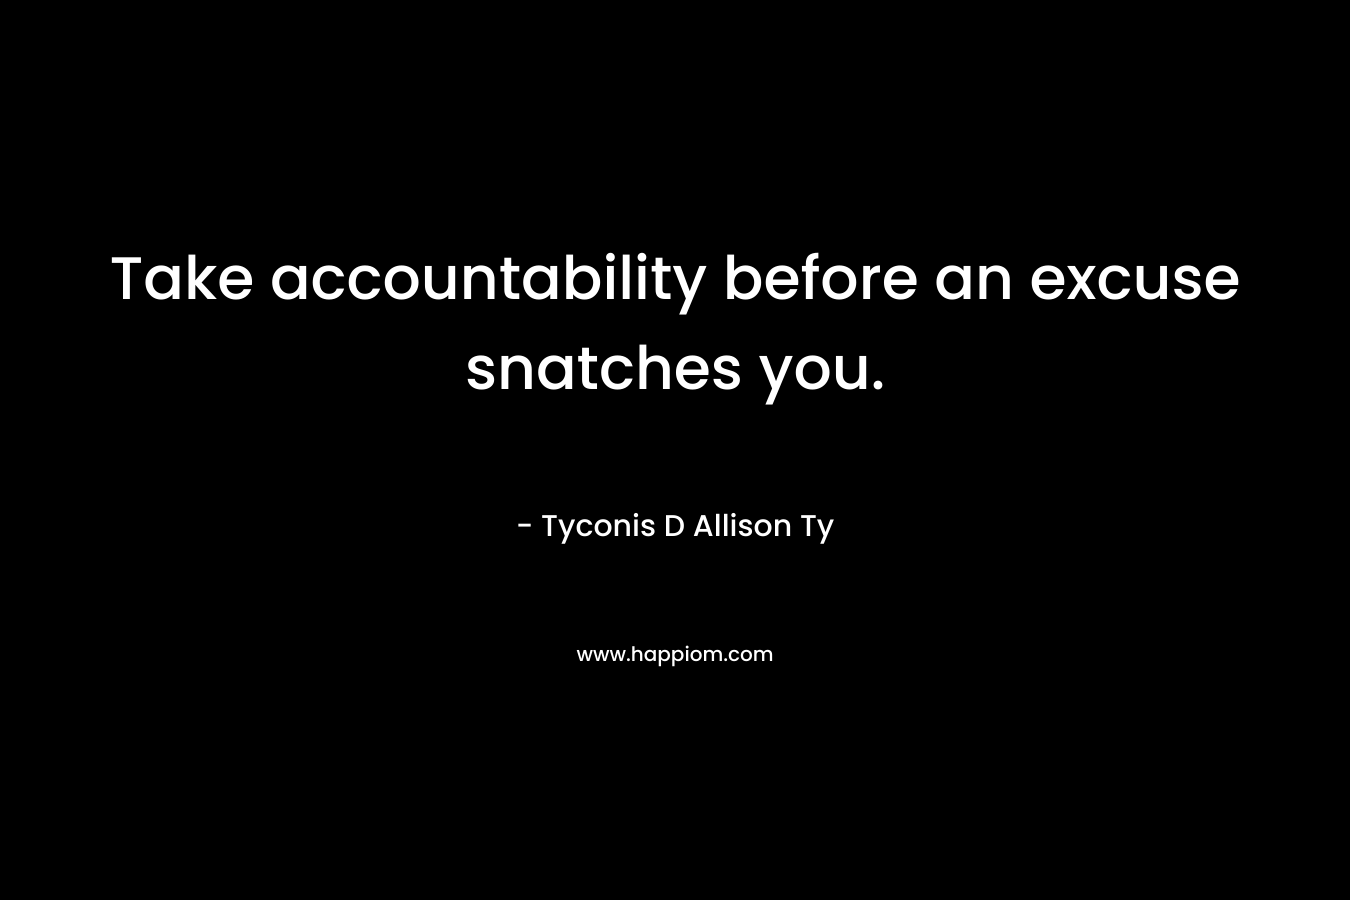 Take accountability before an excuse snatches you. – Tyconis D Allison Ty